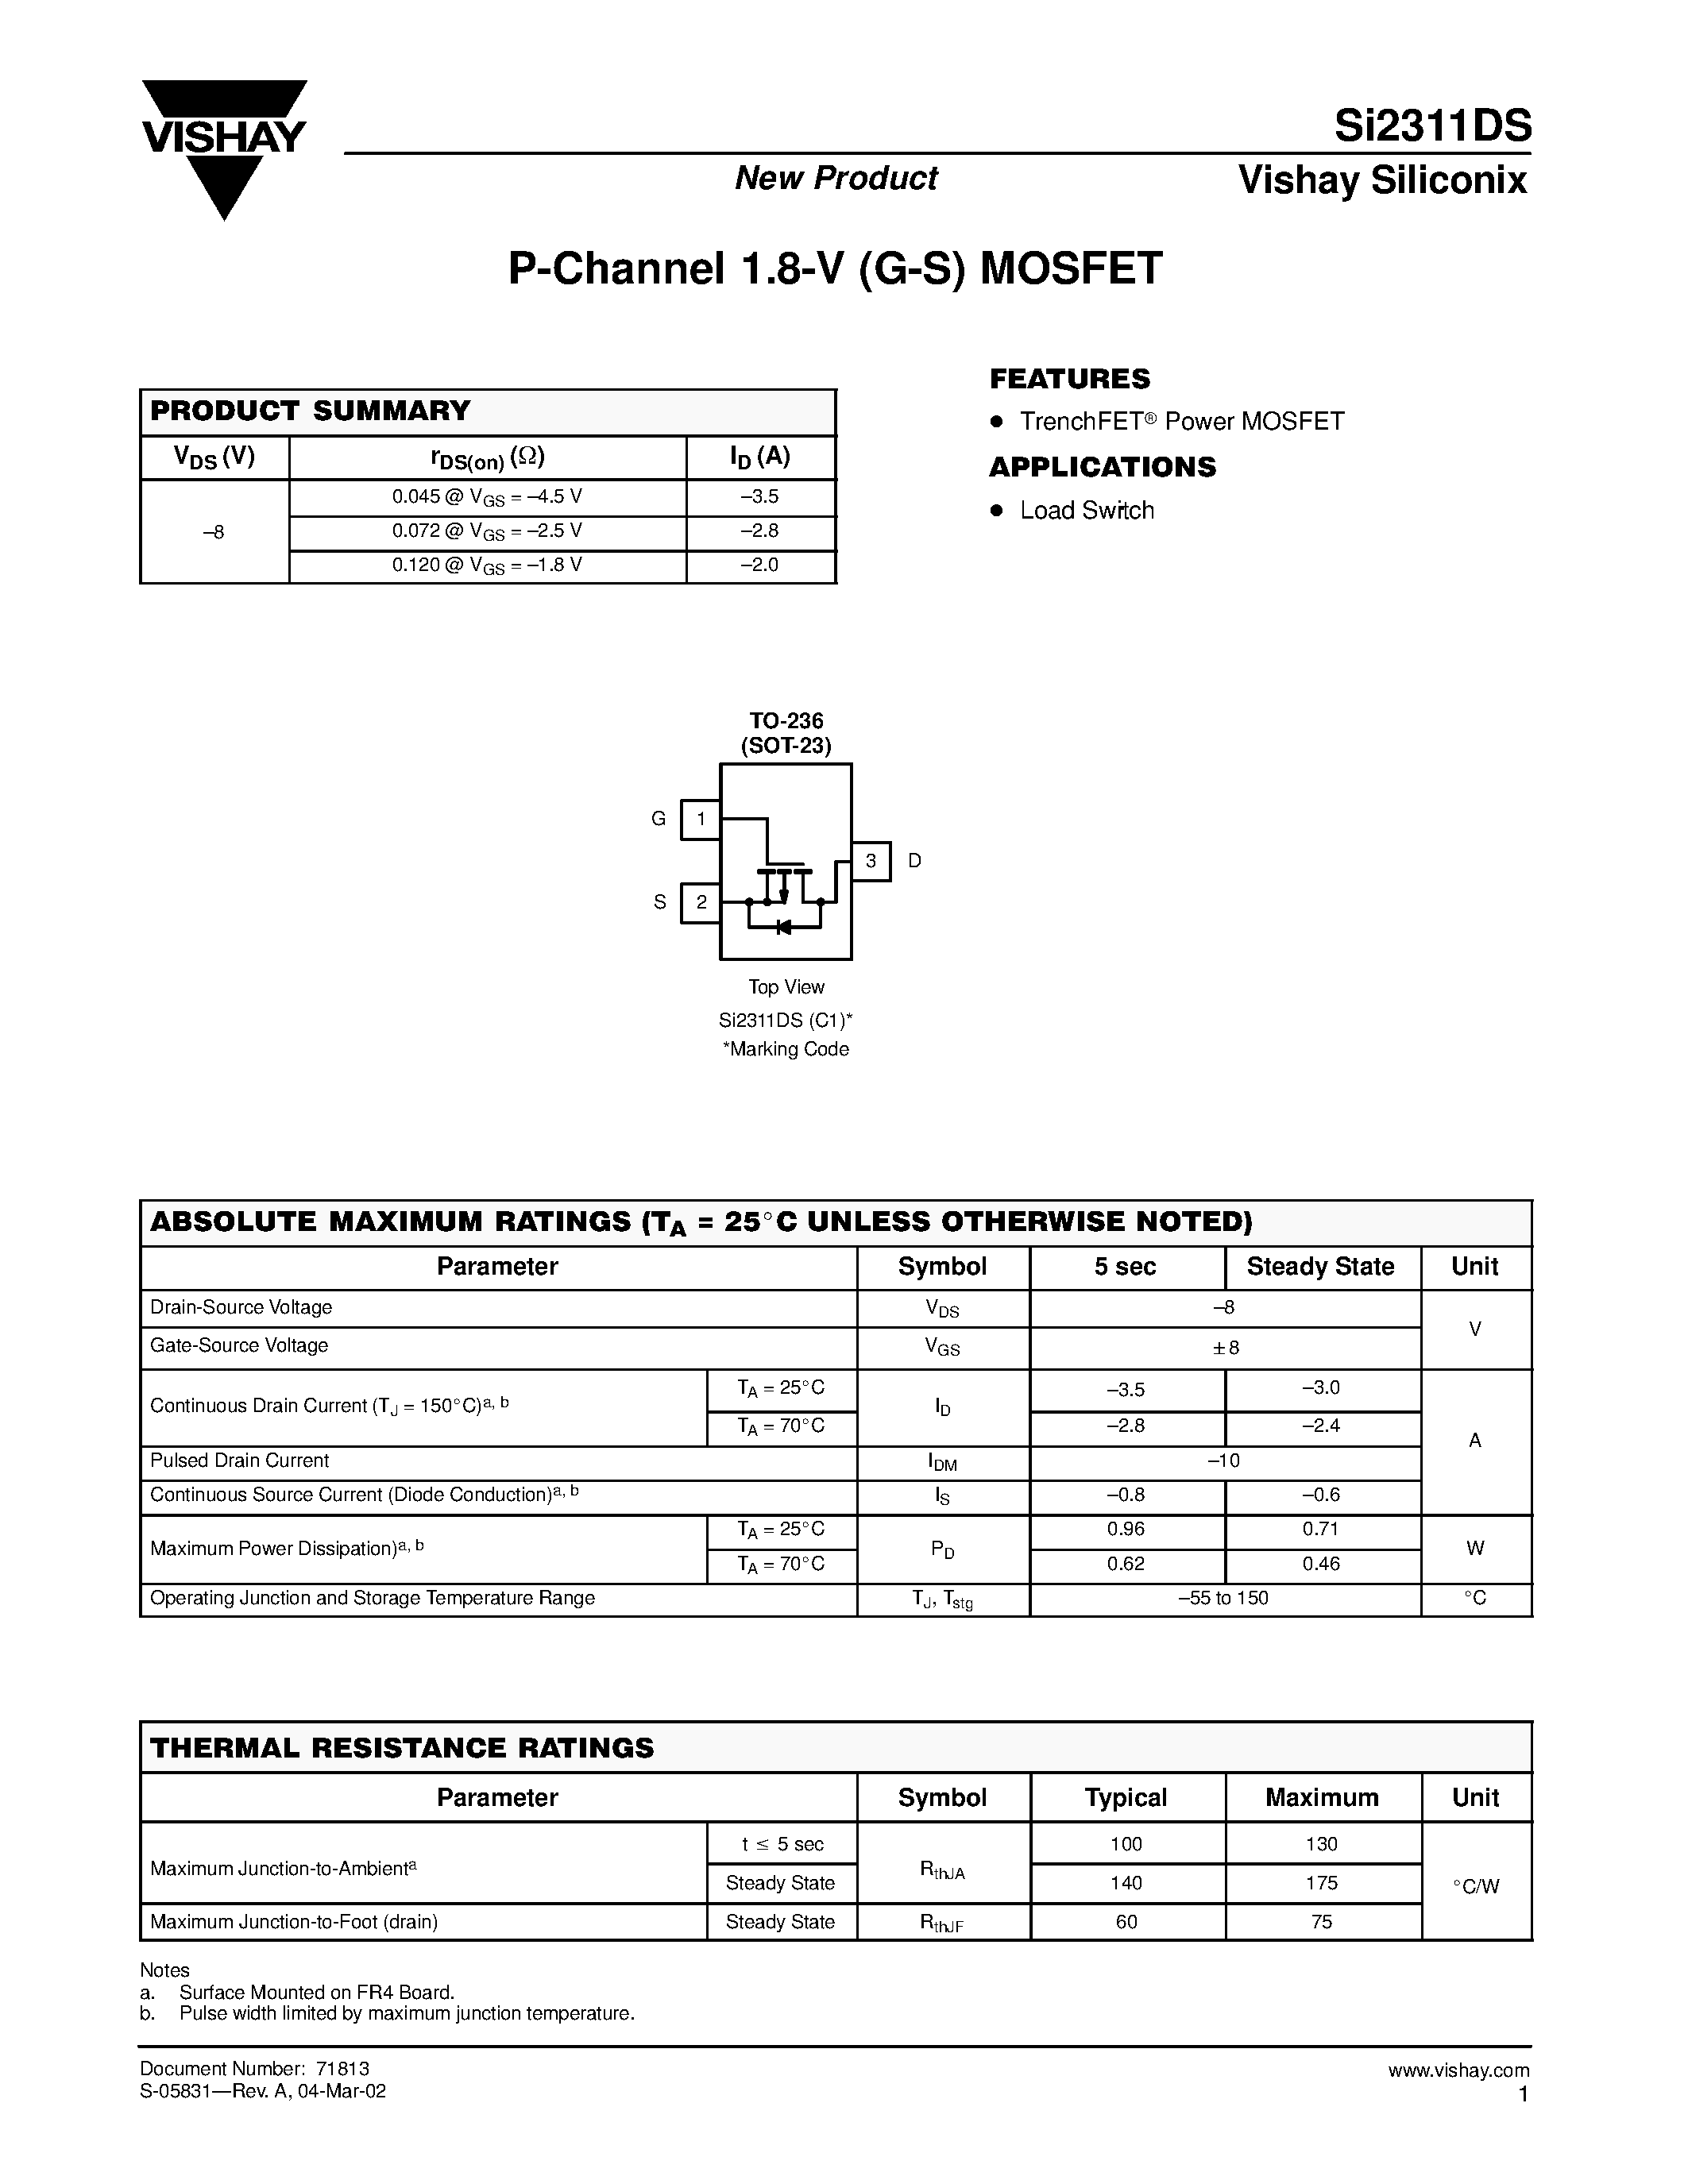 Даташит SI2311DS - P-Channel 1.8-V (G-S) MOSFET страница 1